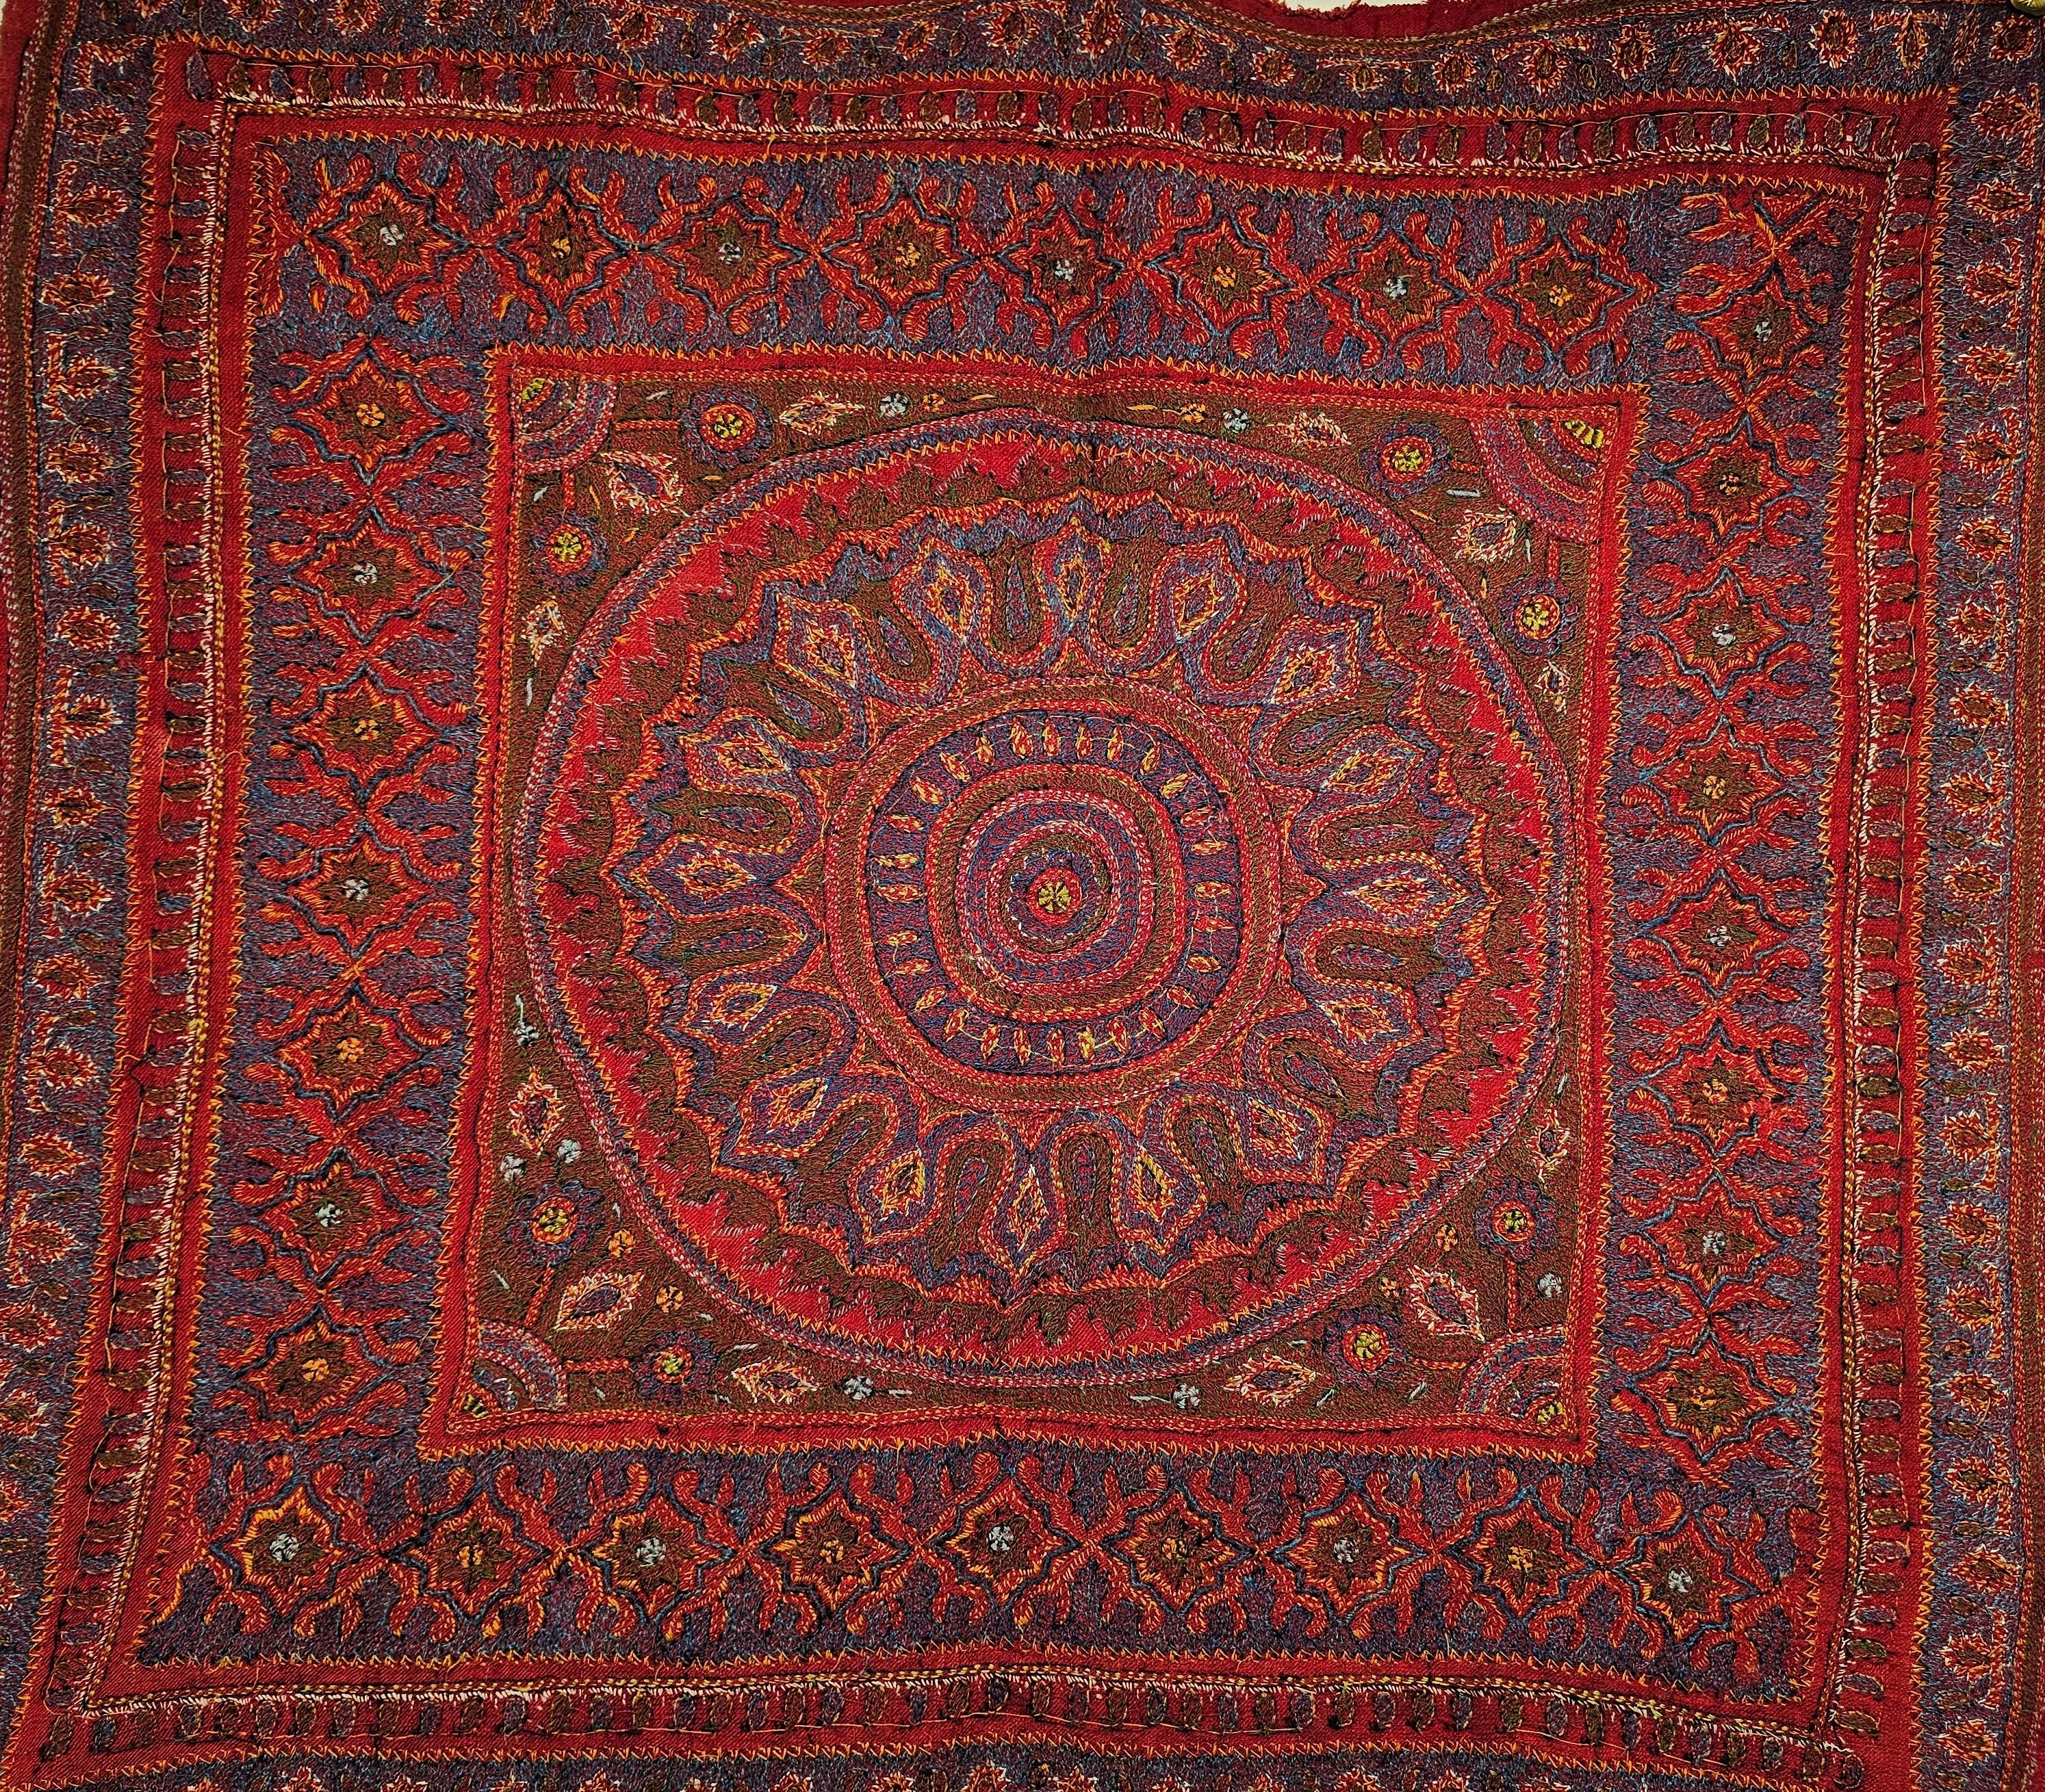 19th Century Persian Kerman Termeh Silk Embroidery Suzani in Red, Blue, Ivory For Sale 6